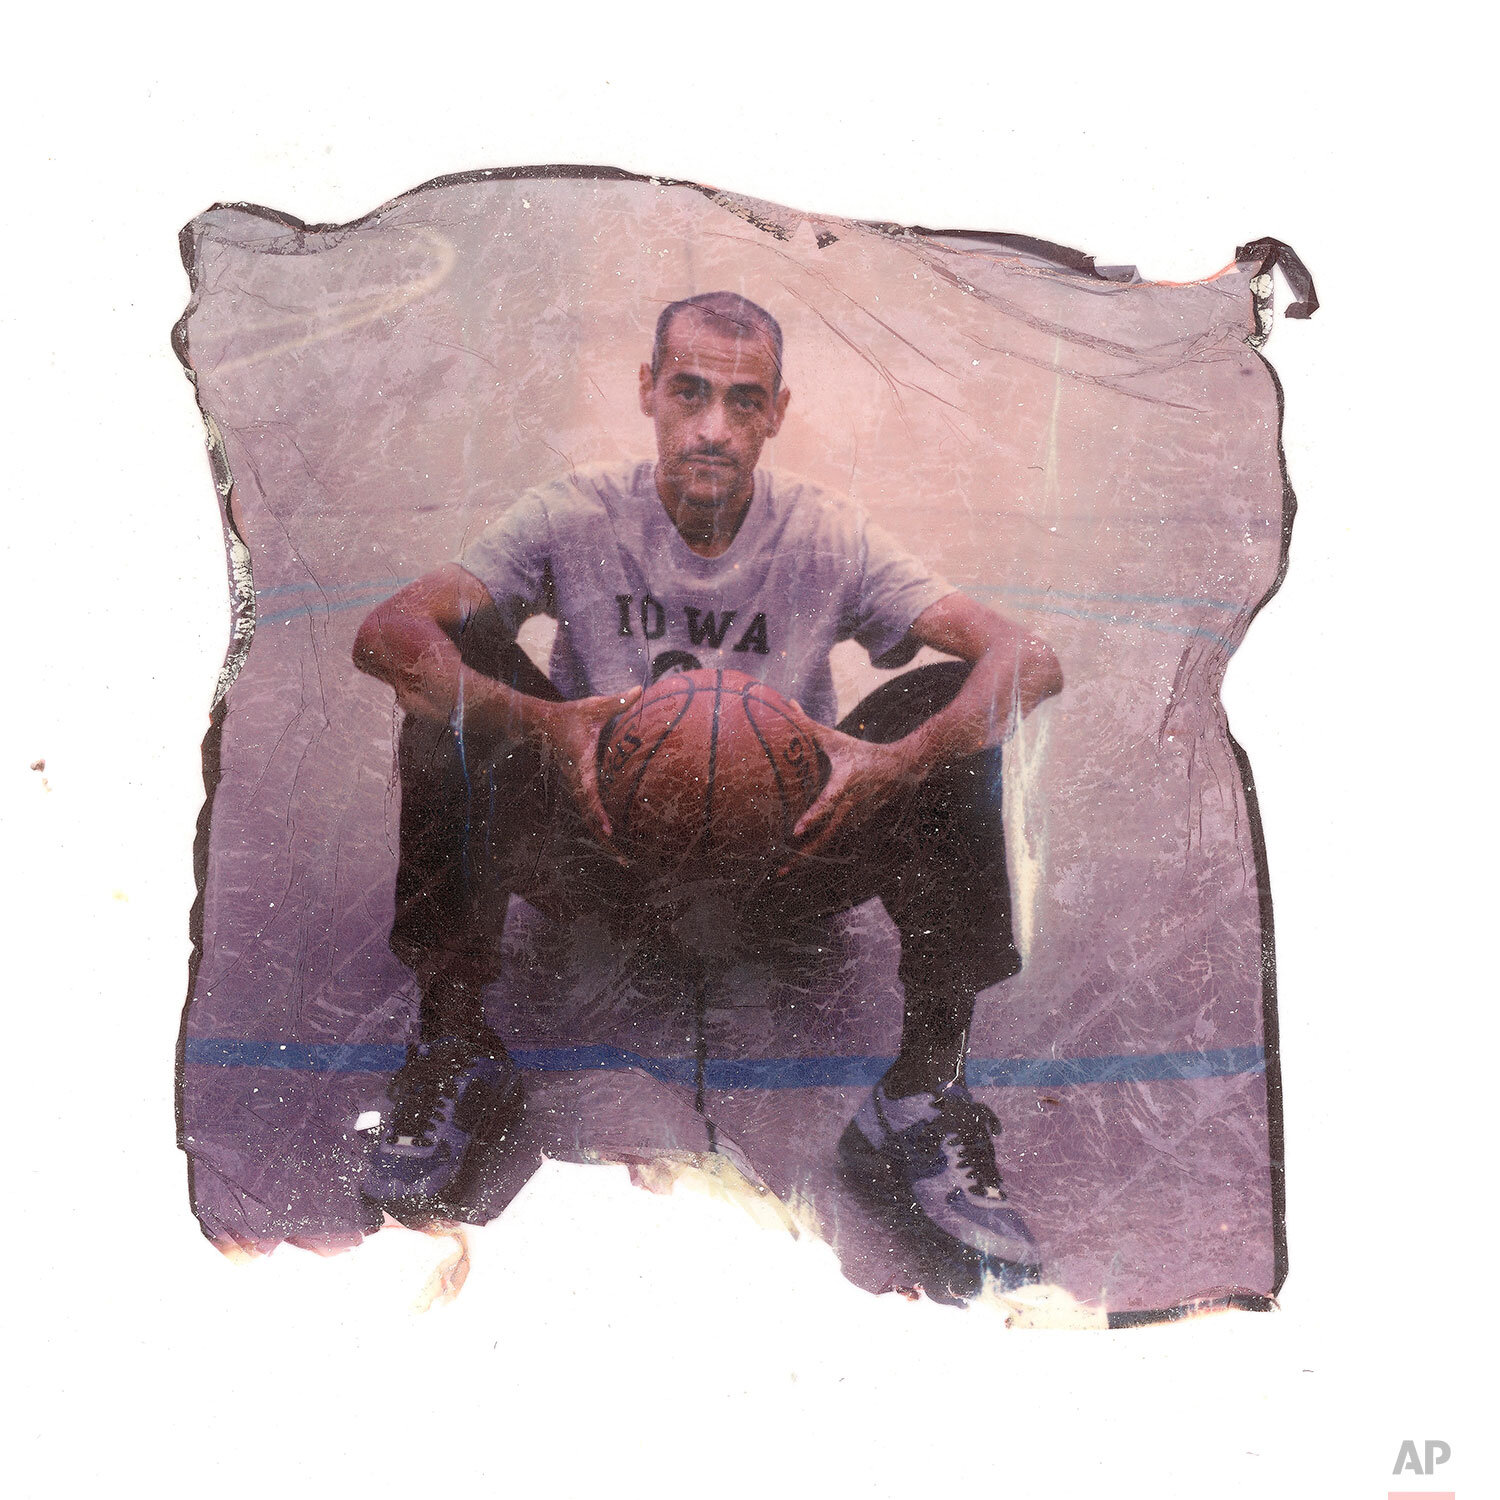  In this image made from a Polaroid emulsion transfer, Patrick Shepard, 48, poses for a portrait on the basketball court in Wylie, Tx., Thursday, Oct. 17, 2019. Shepard shoots hoops at the local gym everyday. The ritual helps him heals, he says. (AP 